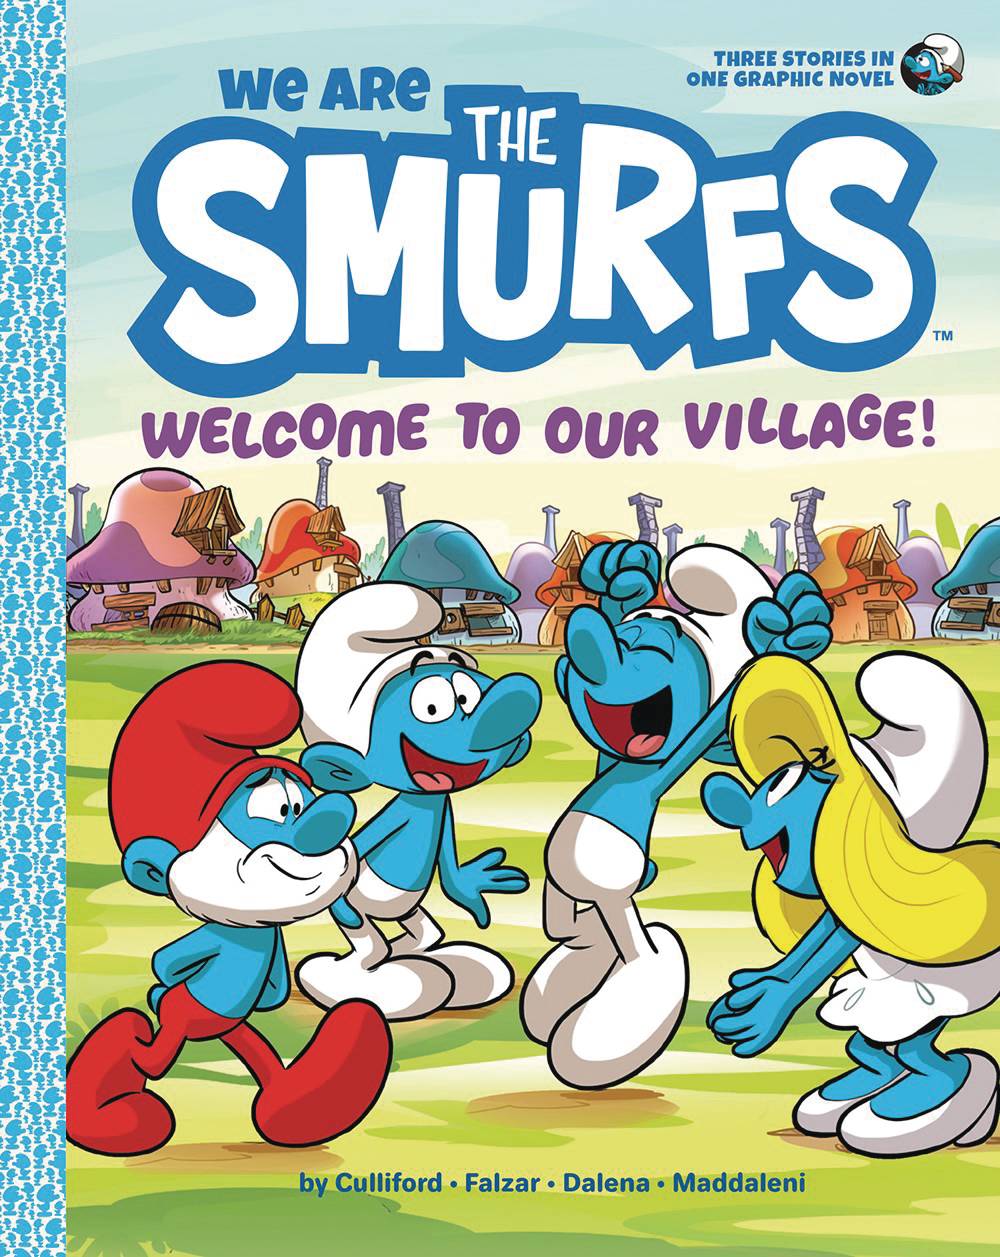 Village　Welcome　01　We　Volume　Smurfs　–　Are　The　Comics　To　Our　Etc.